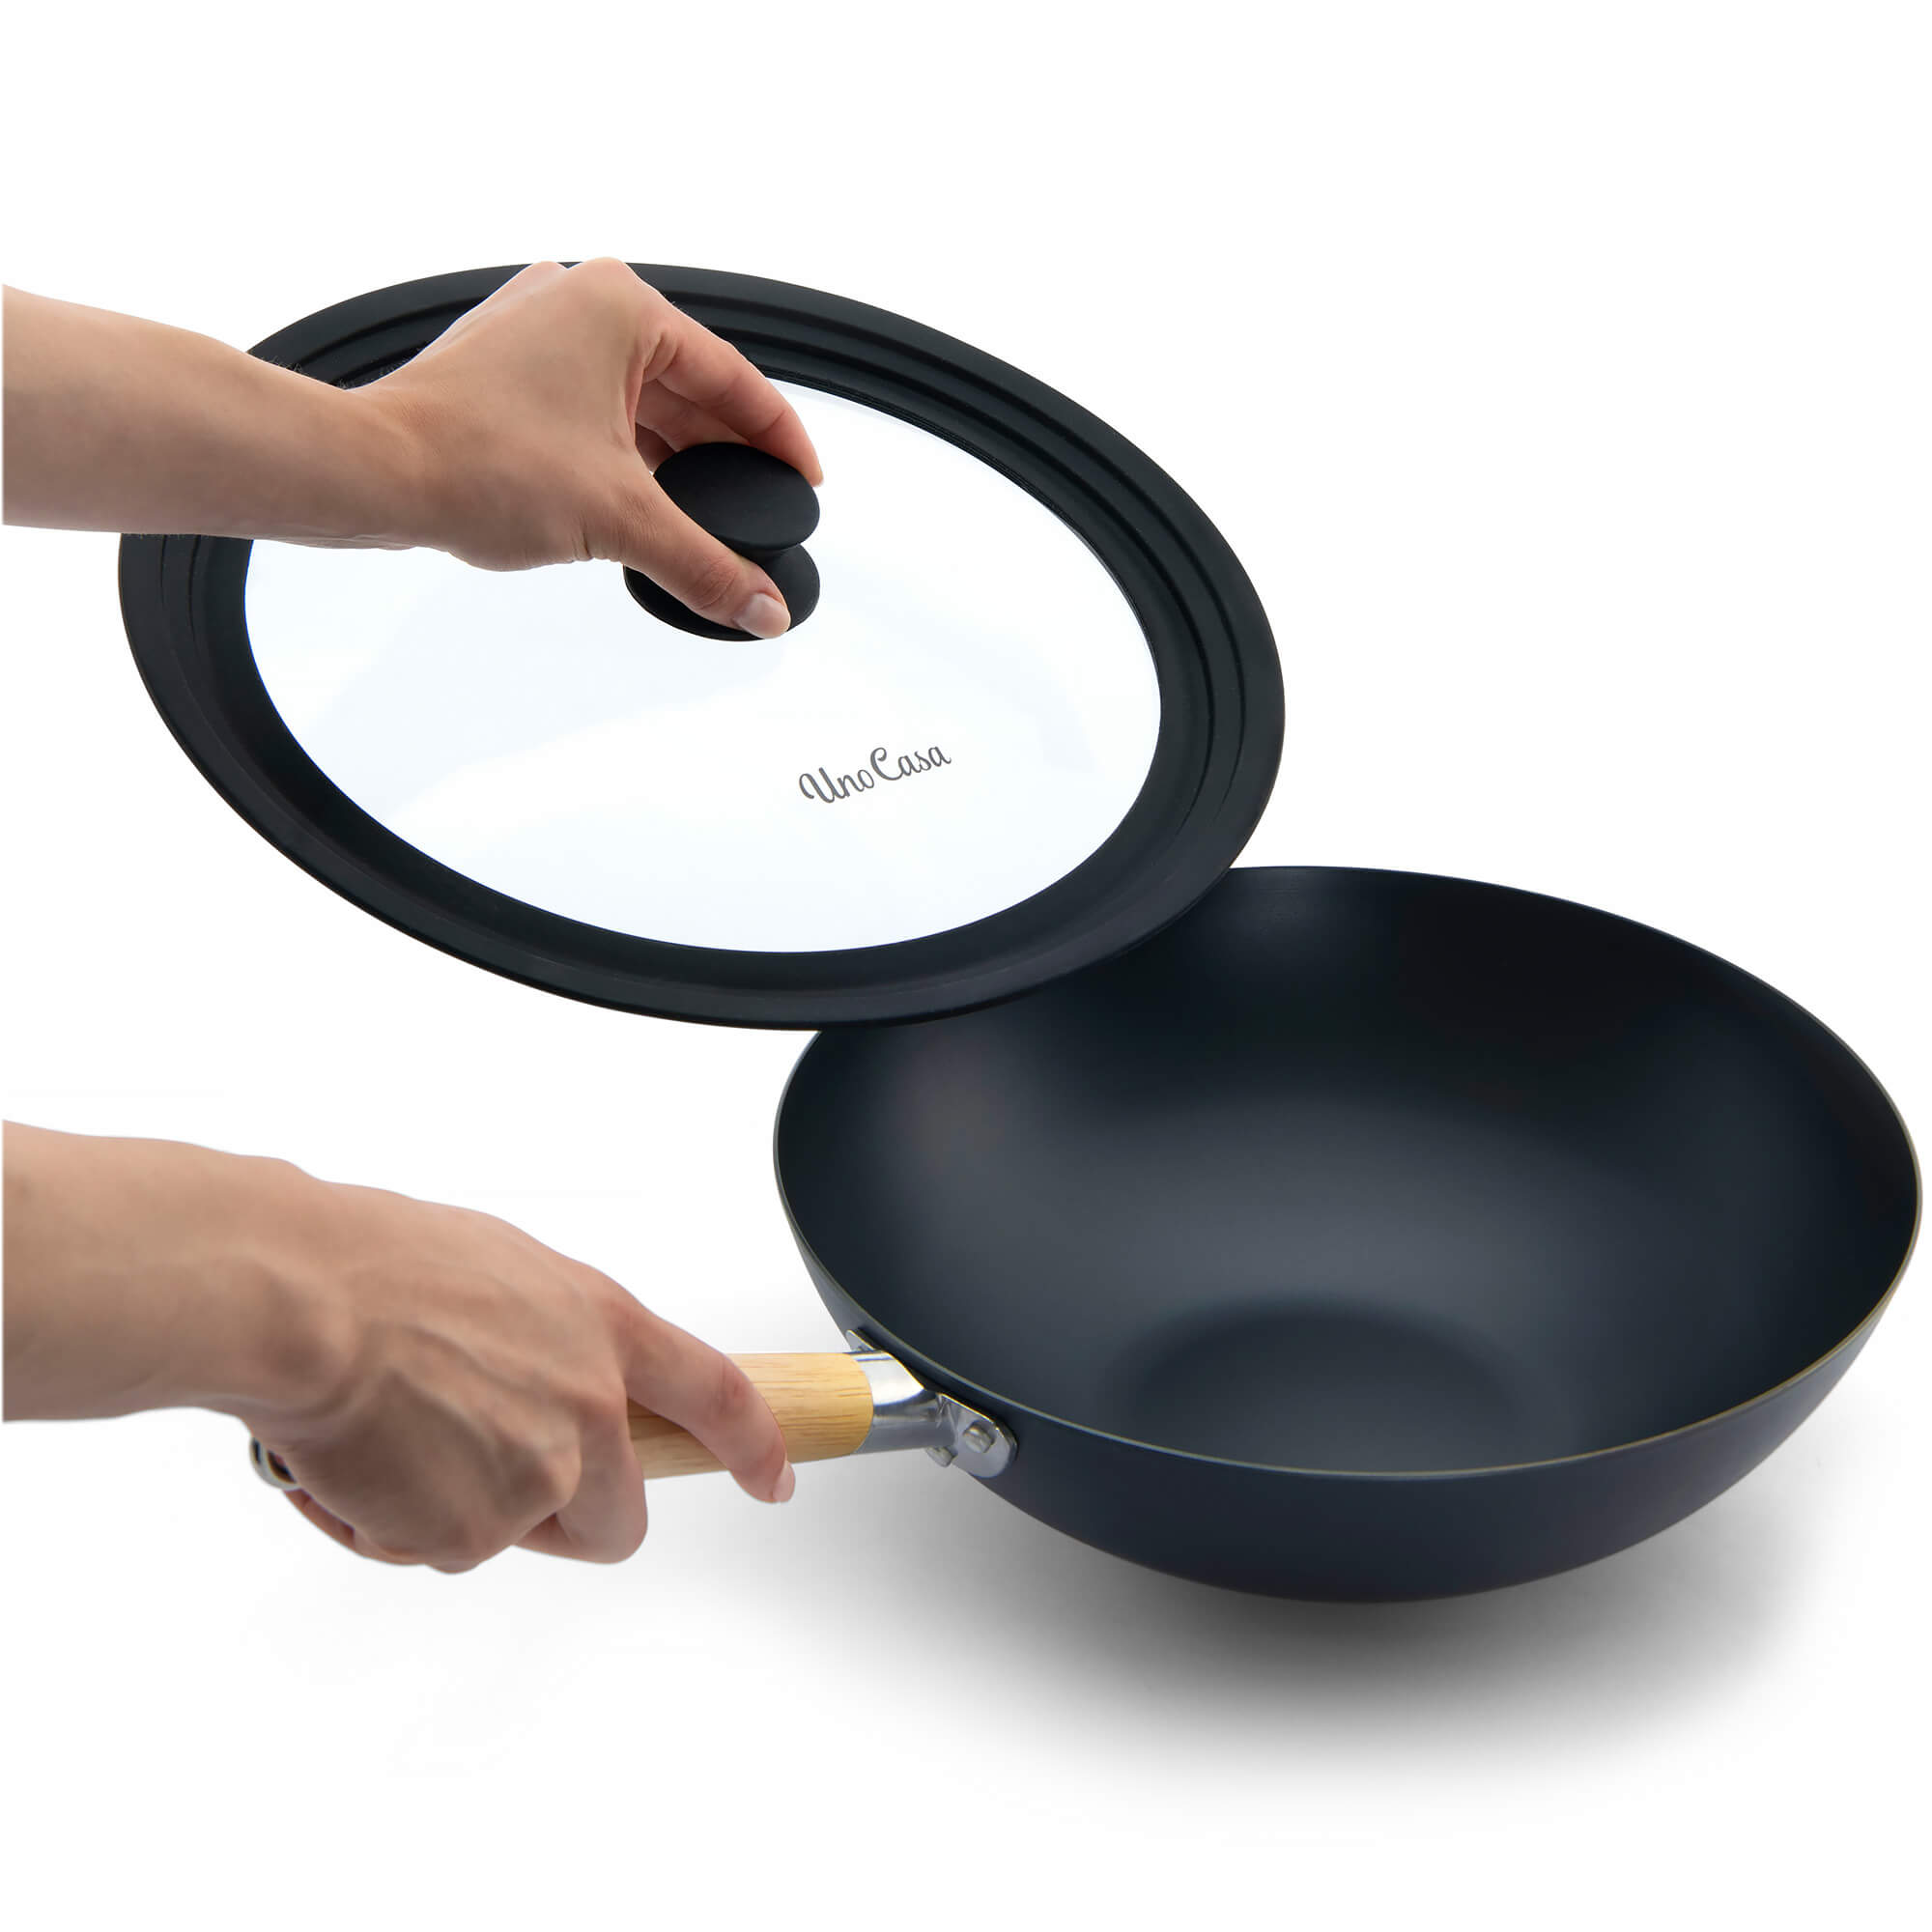 How to Season a Carbon-Steel Skillet or Wok